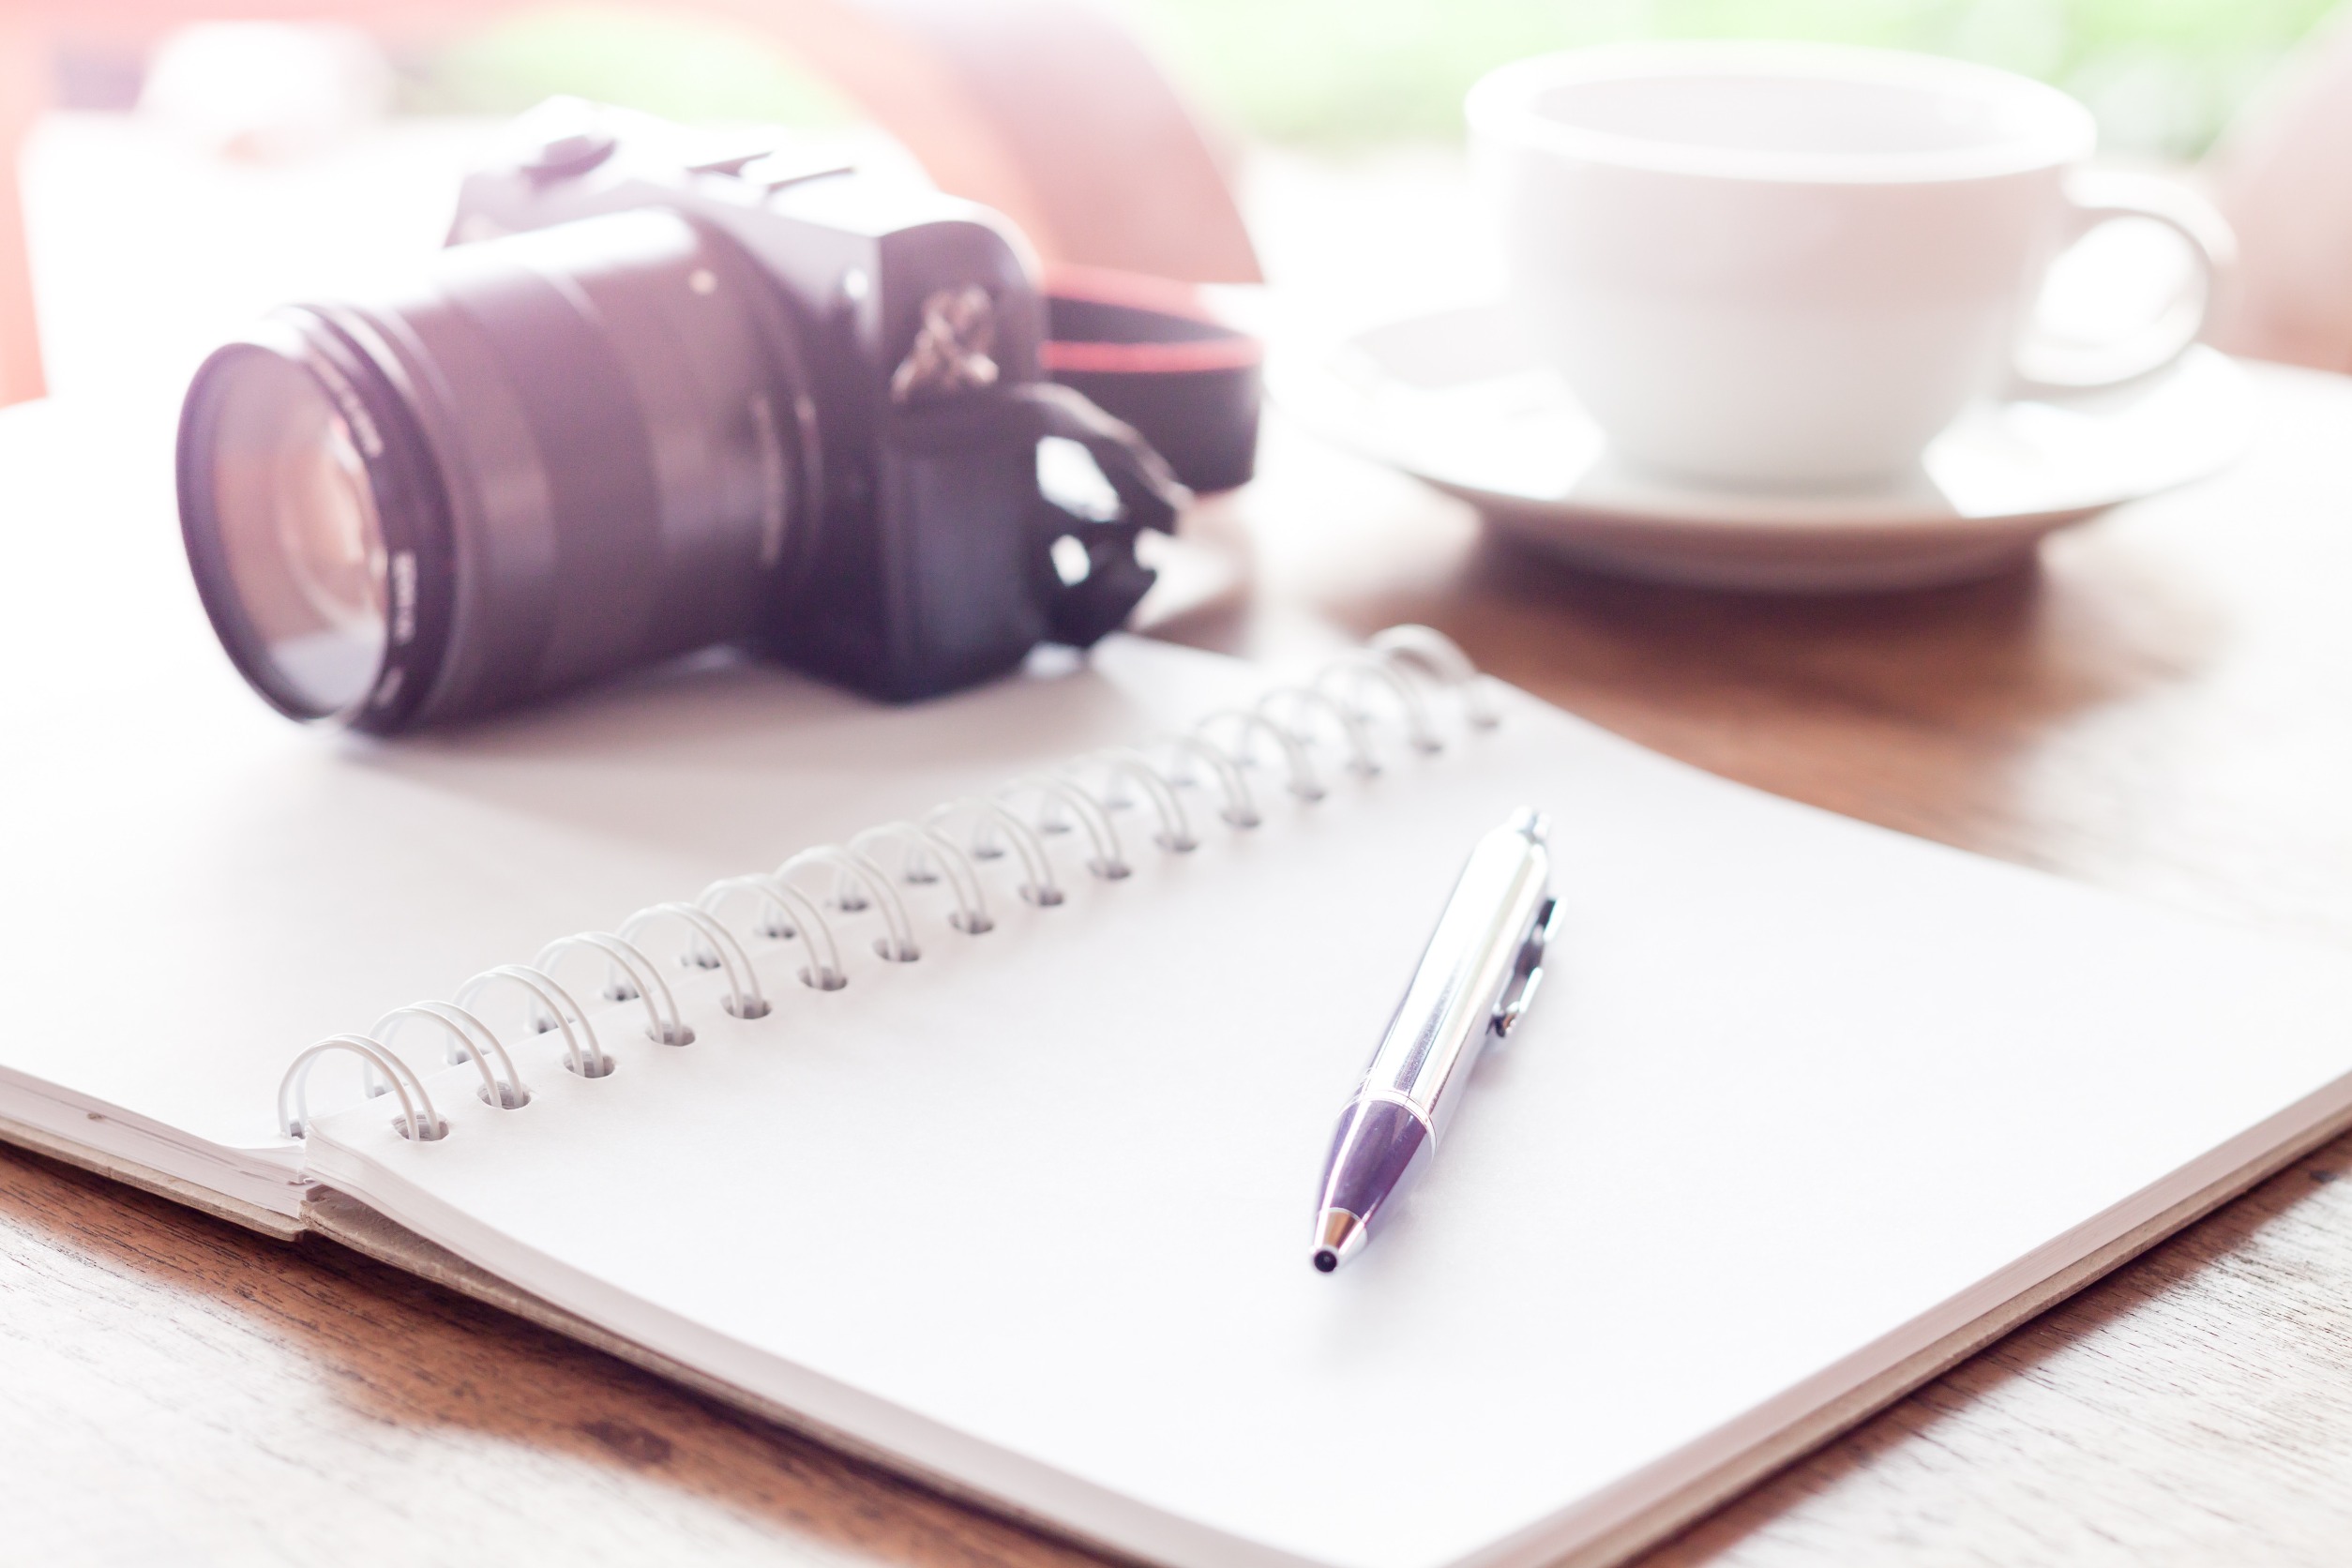 <p>Many wish they had documented their life’s journey more thoroughly through journals, photos, or videos. These mementos become priceless treasures, capturing moments and memories to be cherished and shared.</p>